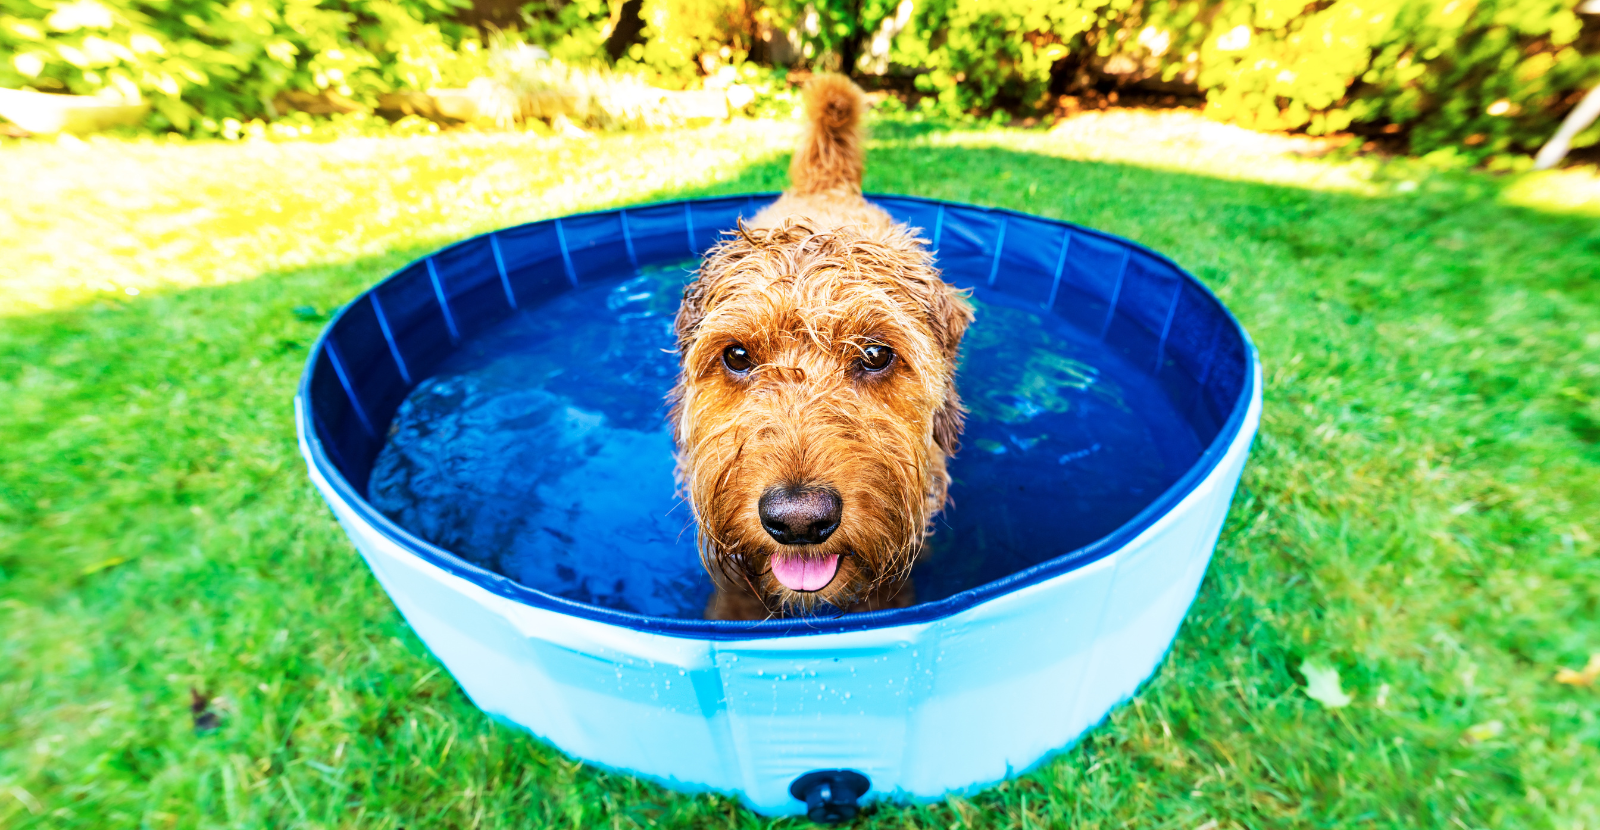 Top 7 Dog Days of Summer Health Tips